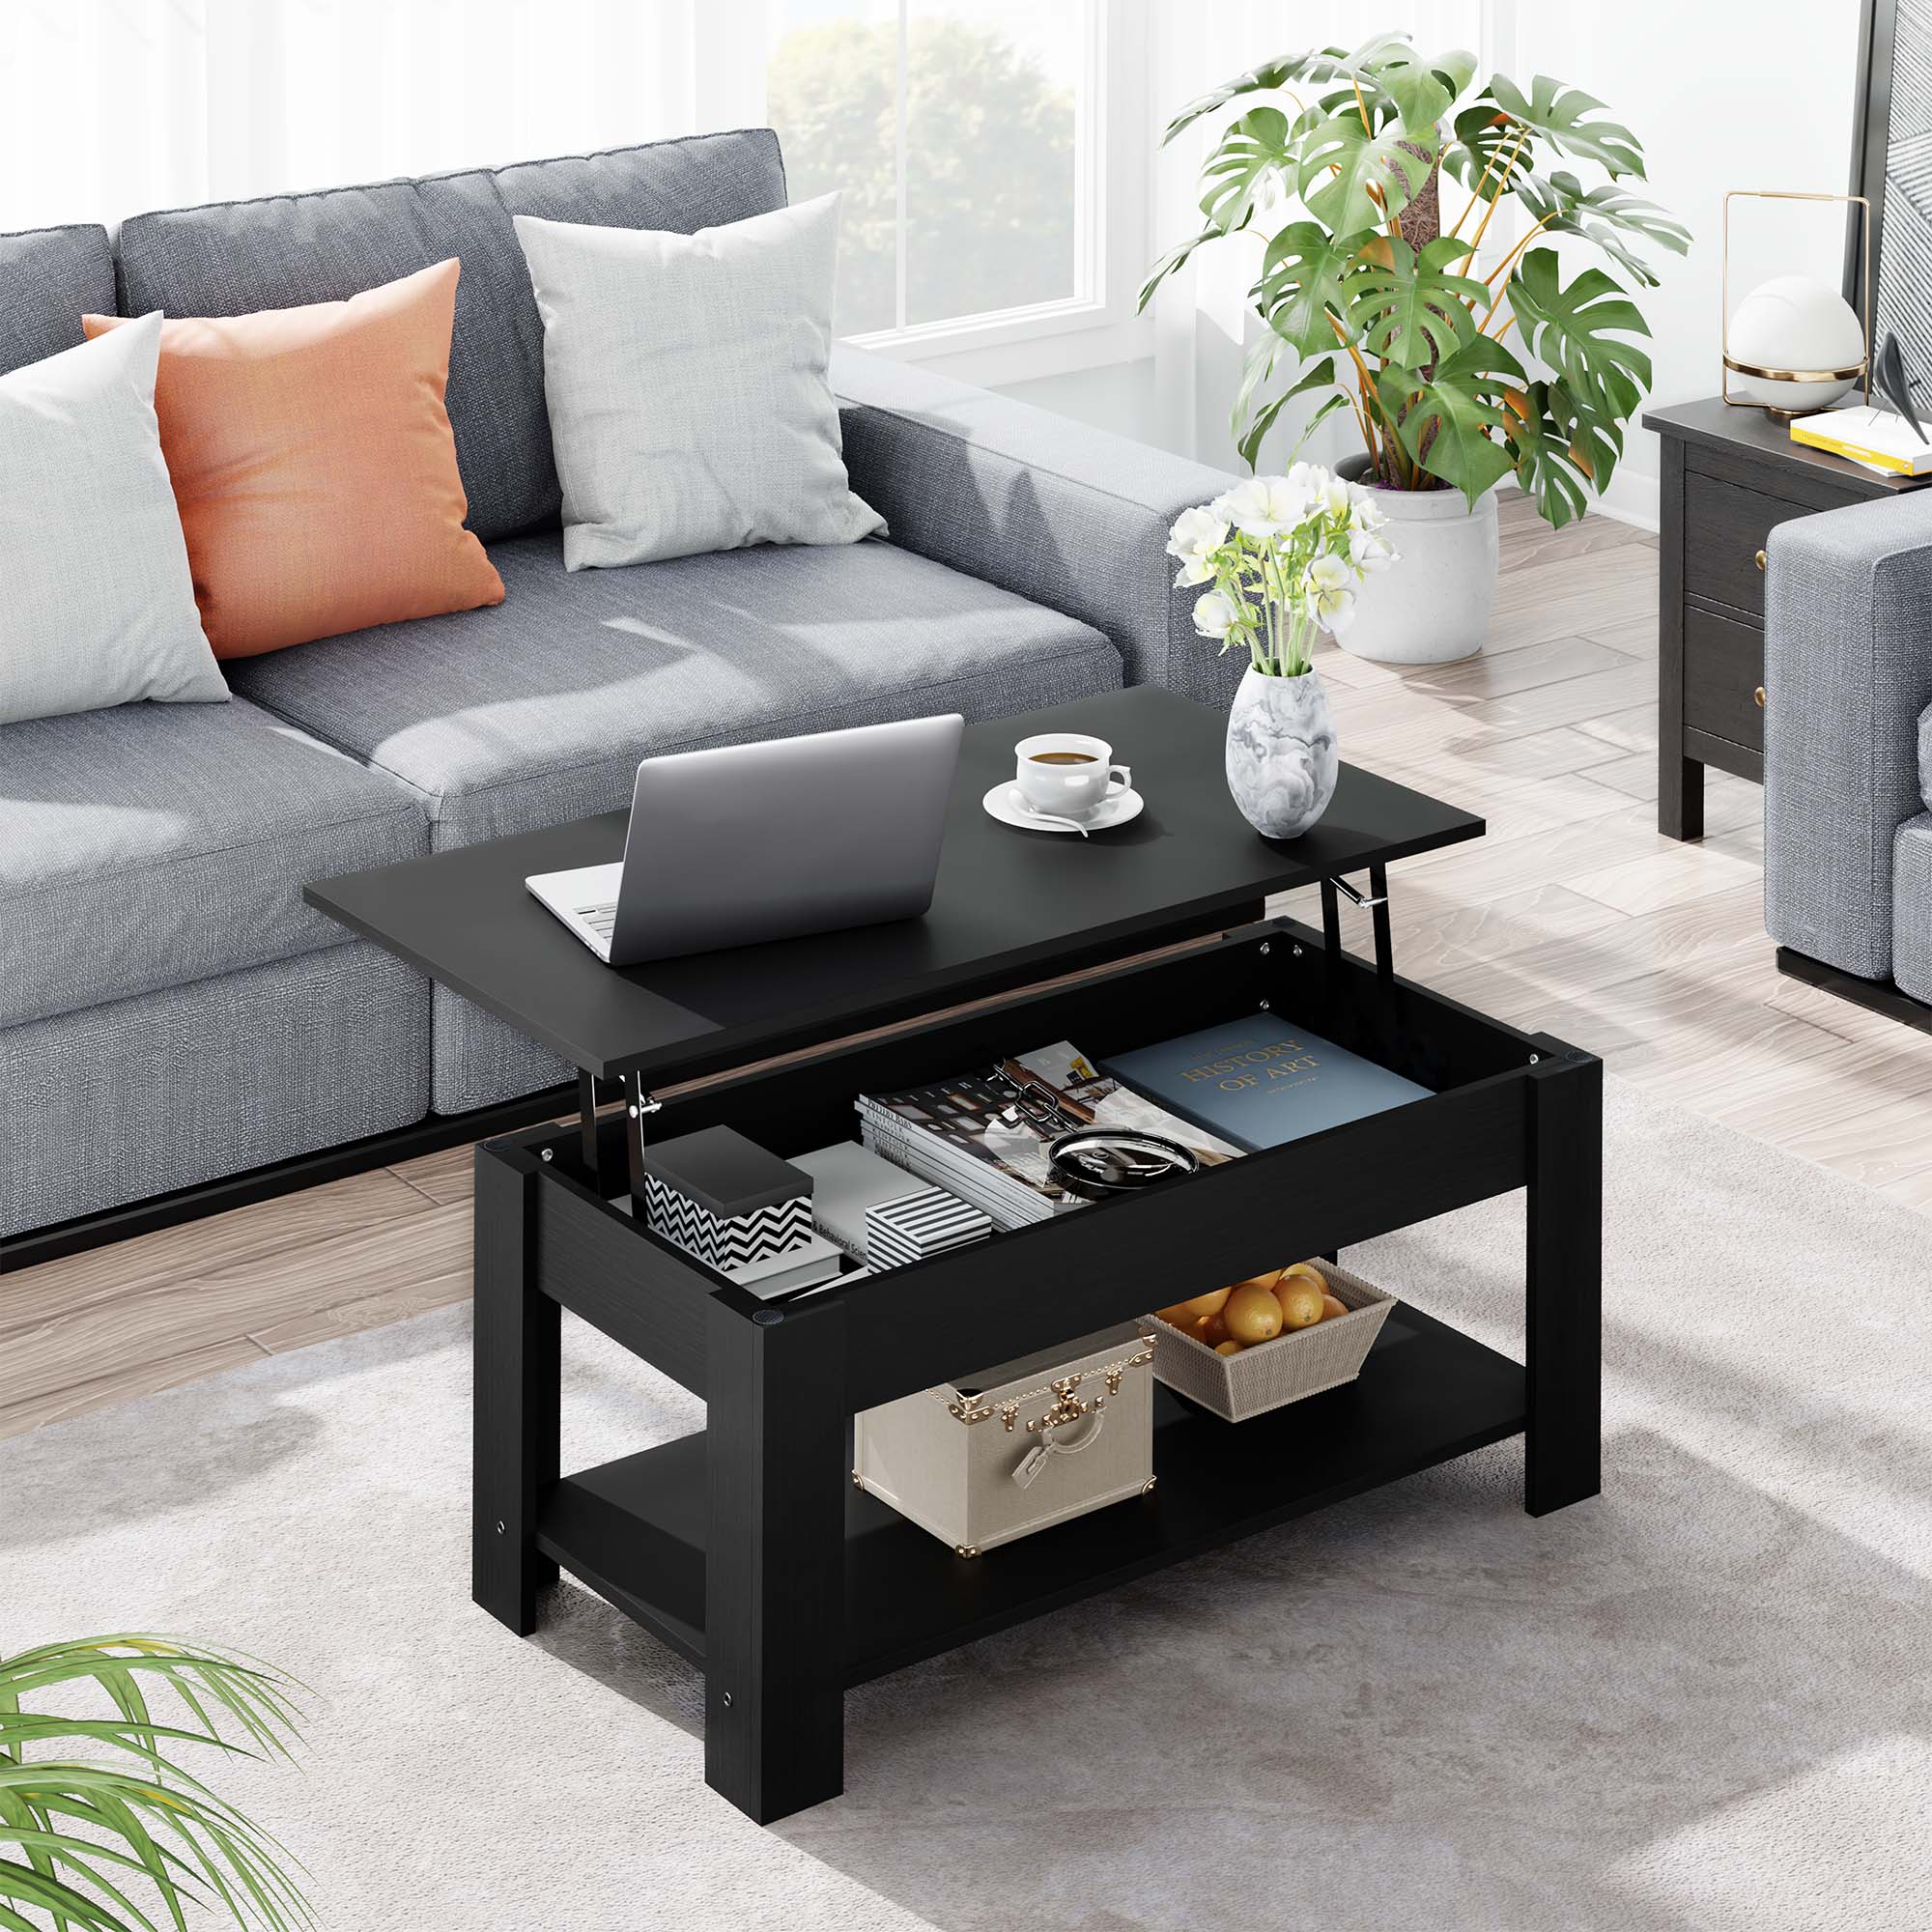 TV Stands & Coffee Table